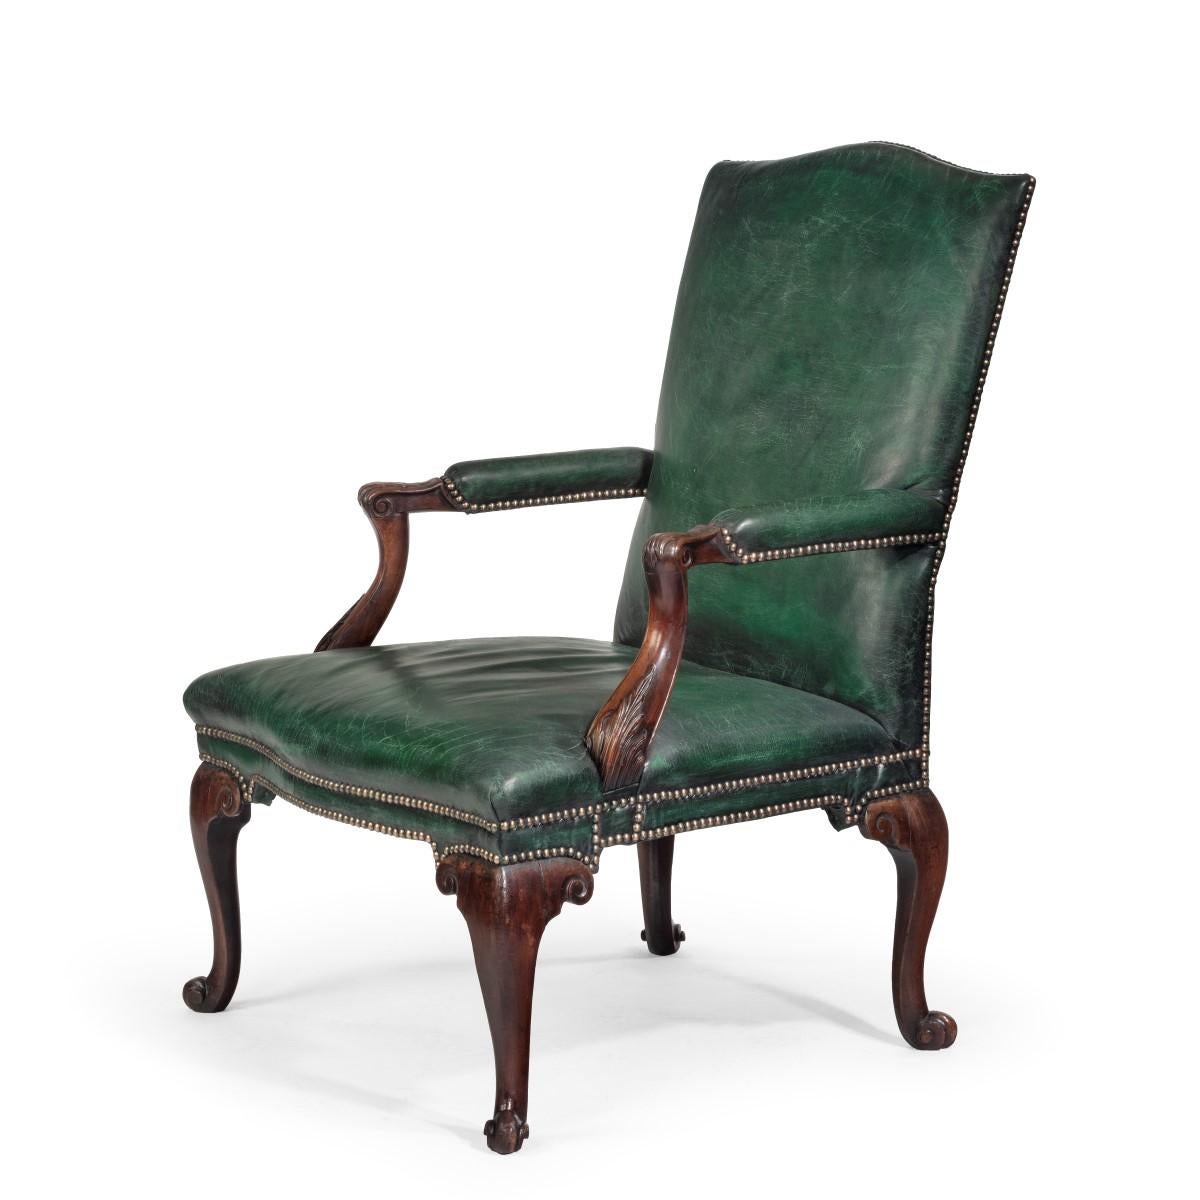 English George III Chippendale Period Mahogany Wing Armchair